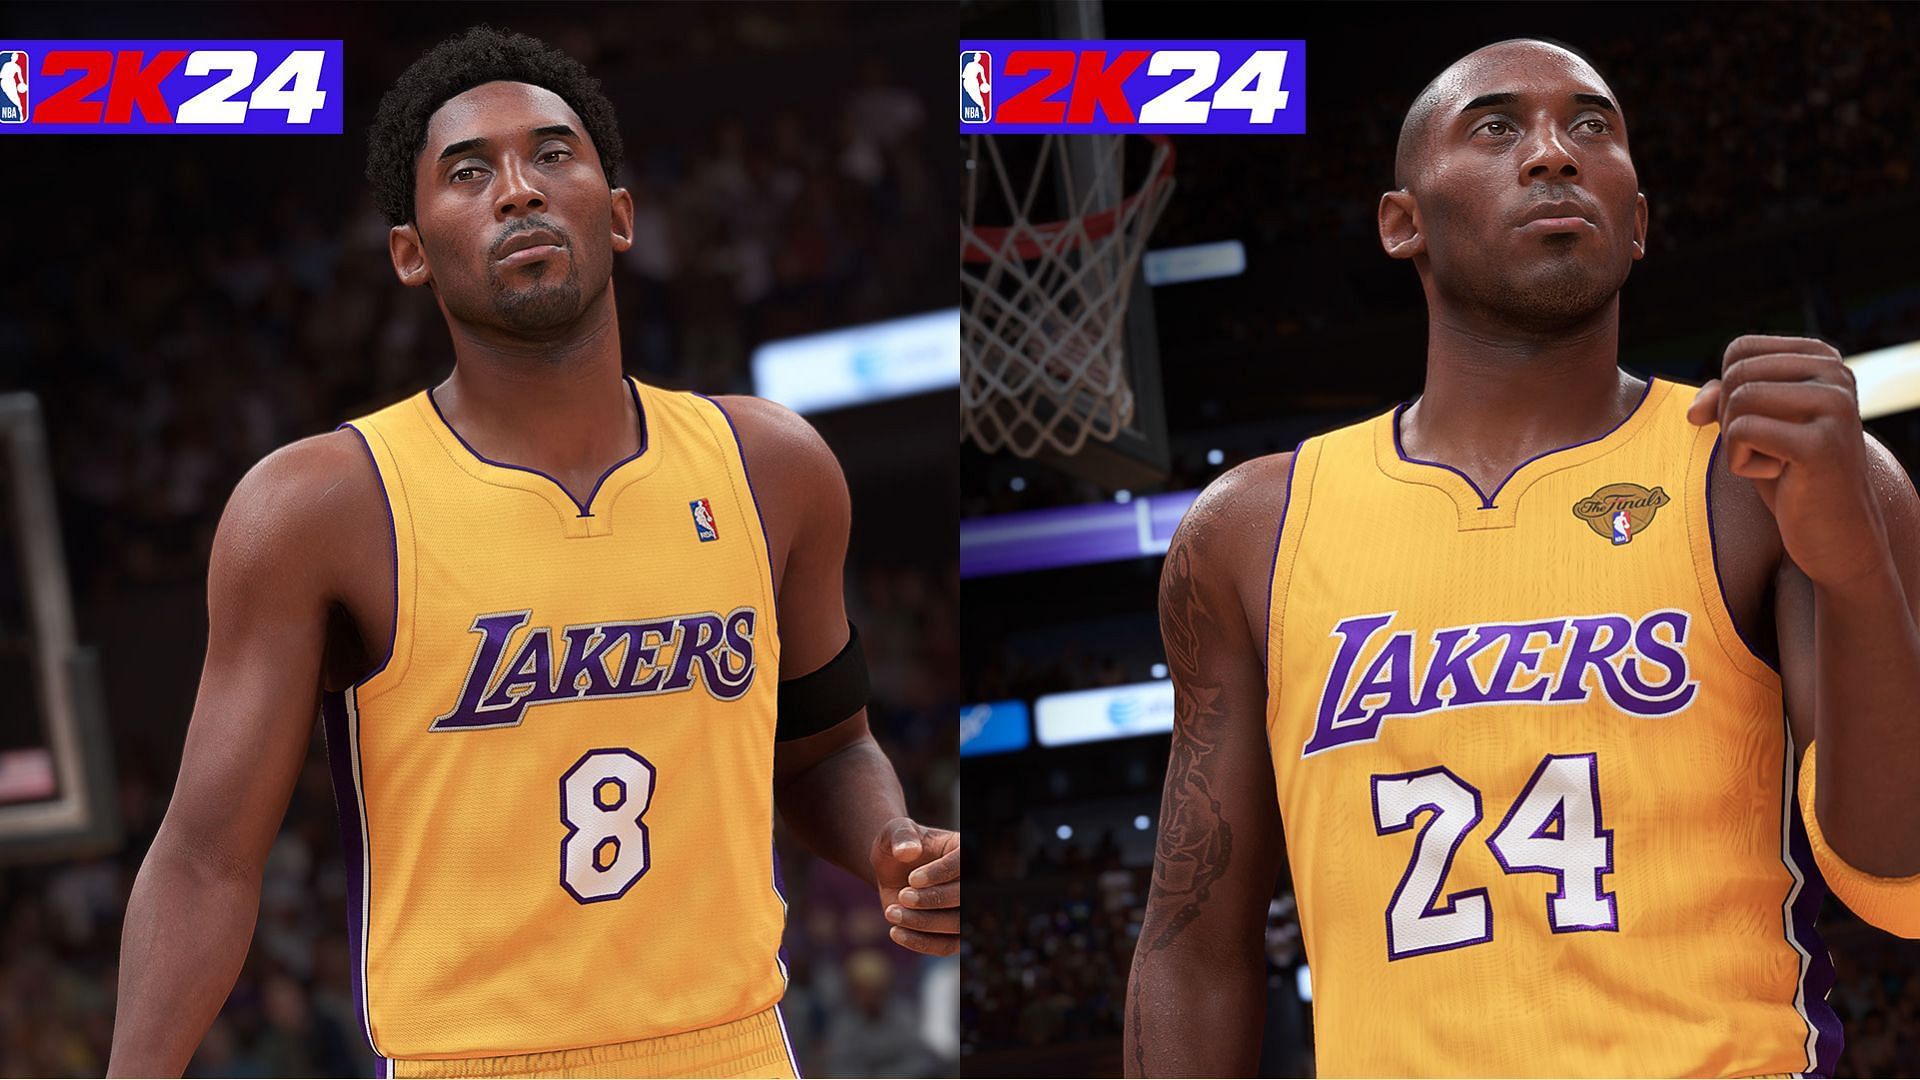 NBA 2K24 Pre Orders: How To Buy, Price, New Features And More